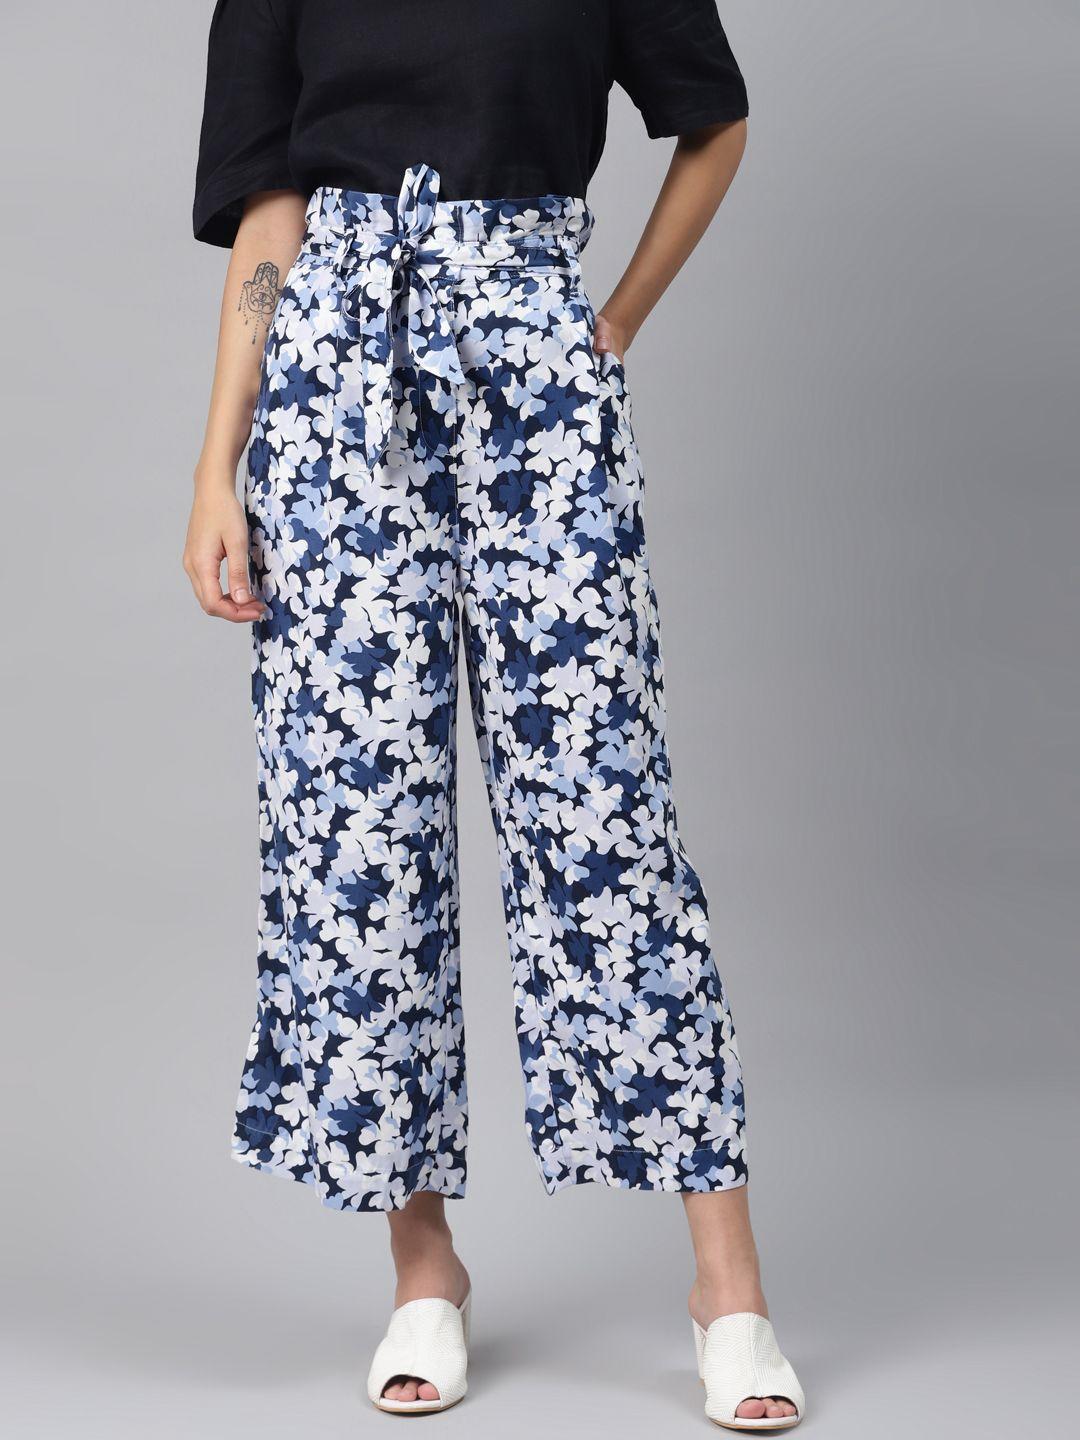 marks & spencer women navy blue & white flared floral printed crop parallel trousers